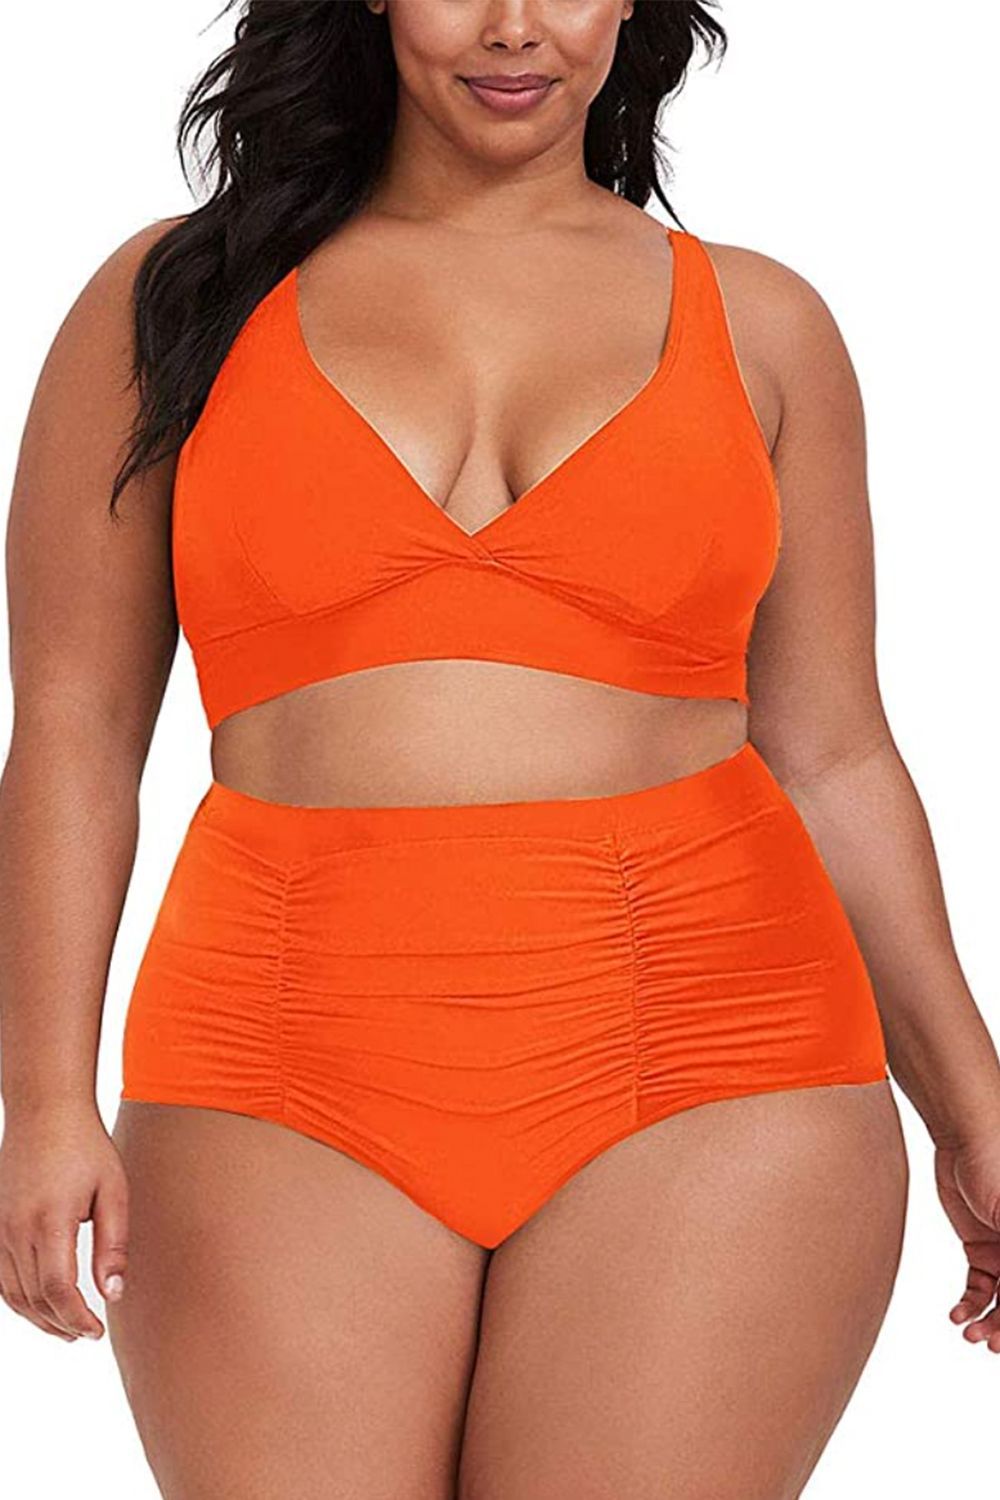 size 14 bathing suits underwire